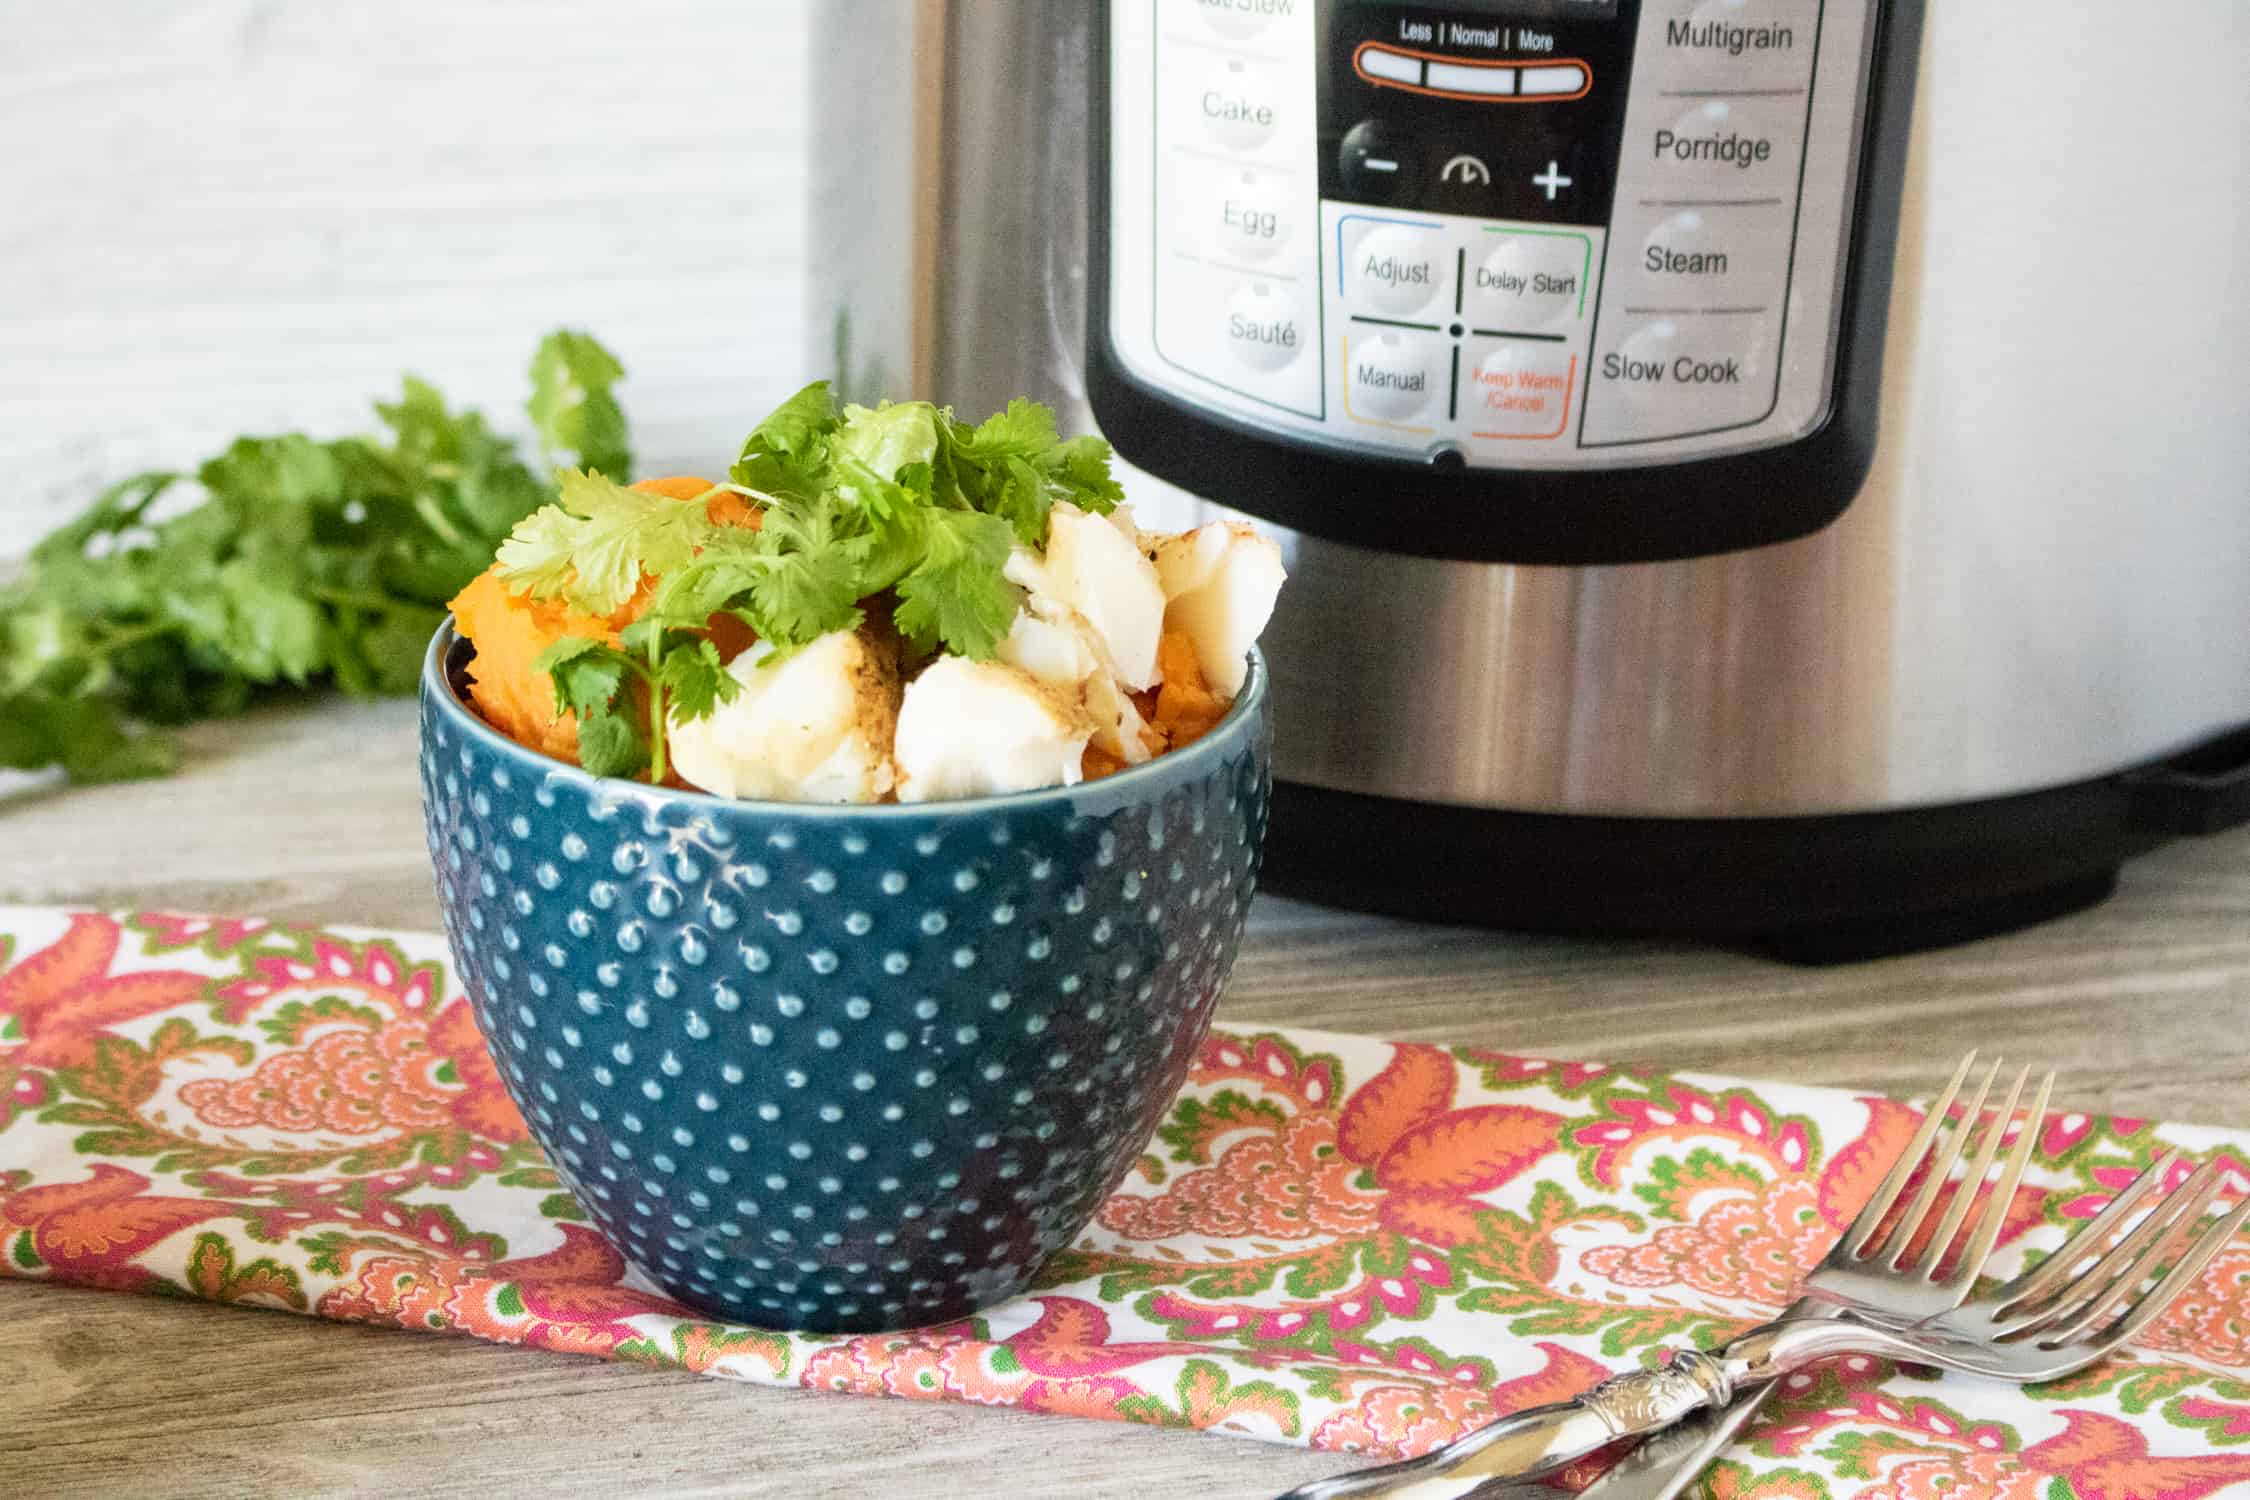 Instant Pot Cod fillets served in a blue polka dot bowl and garnished with parsley